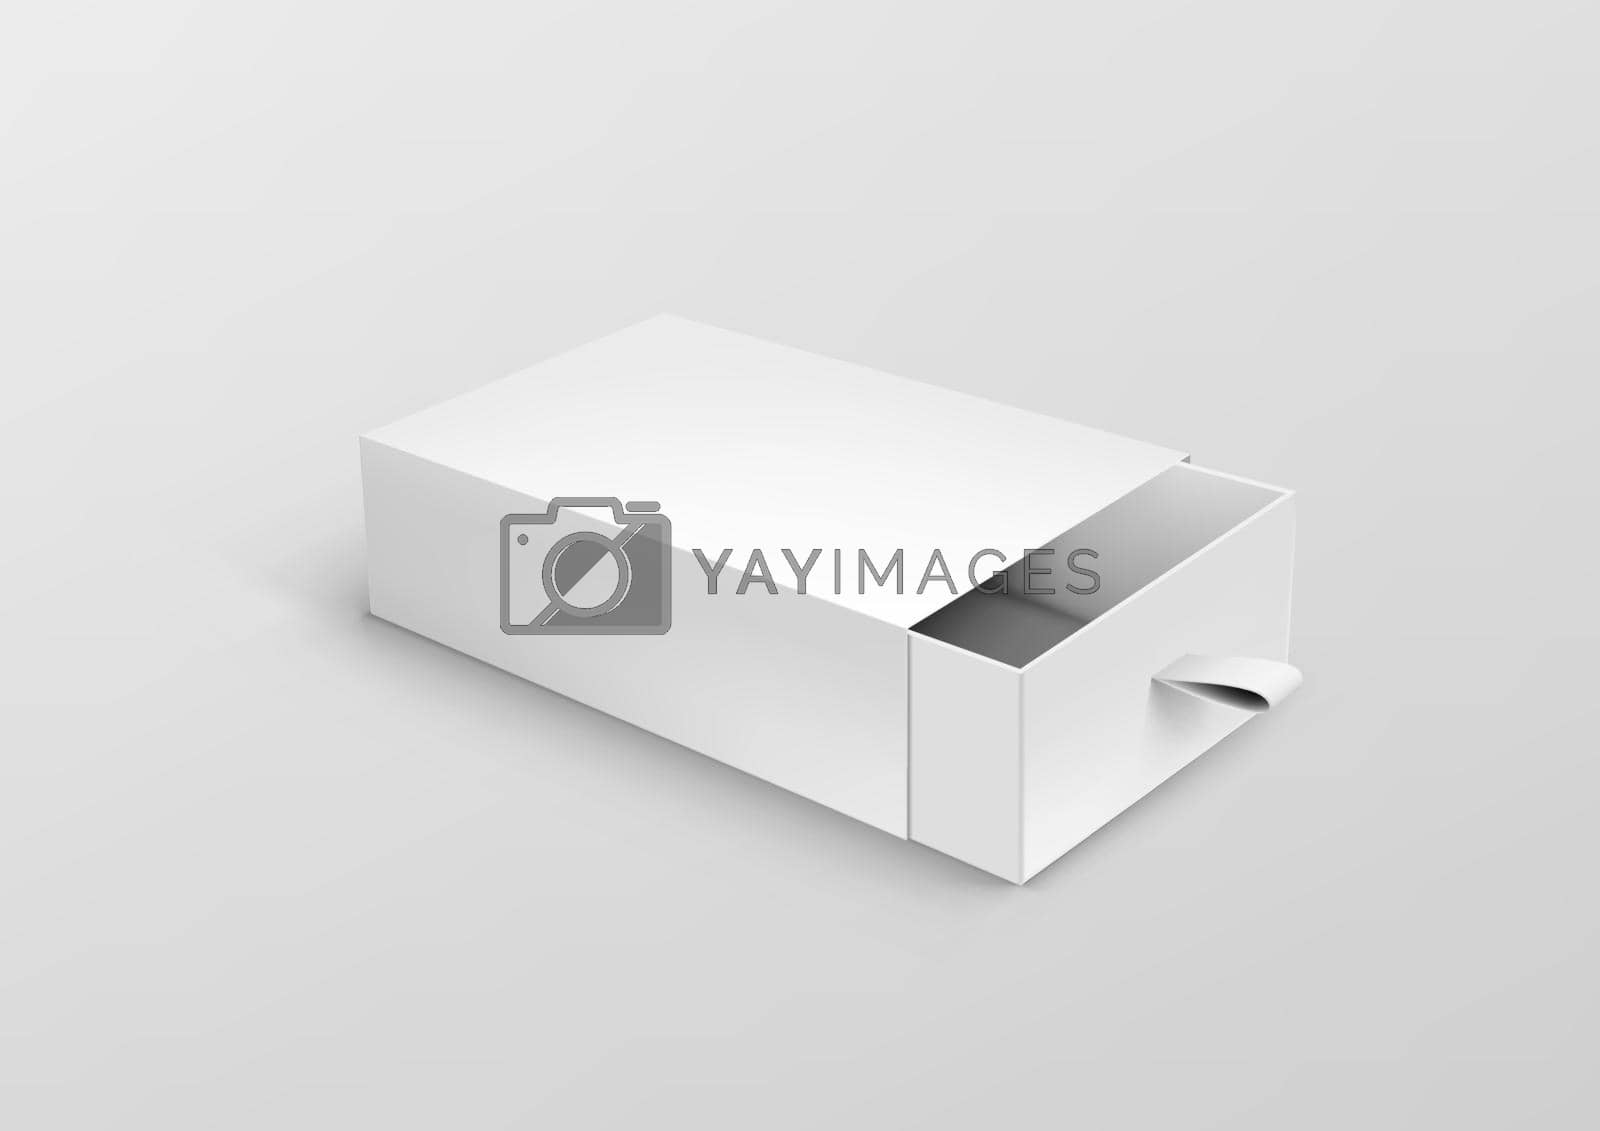 Royalty free image of Package Cardboard Ribbon Pull And Slide Drawer Box by VectorThings